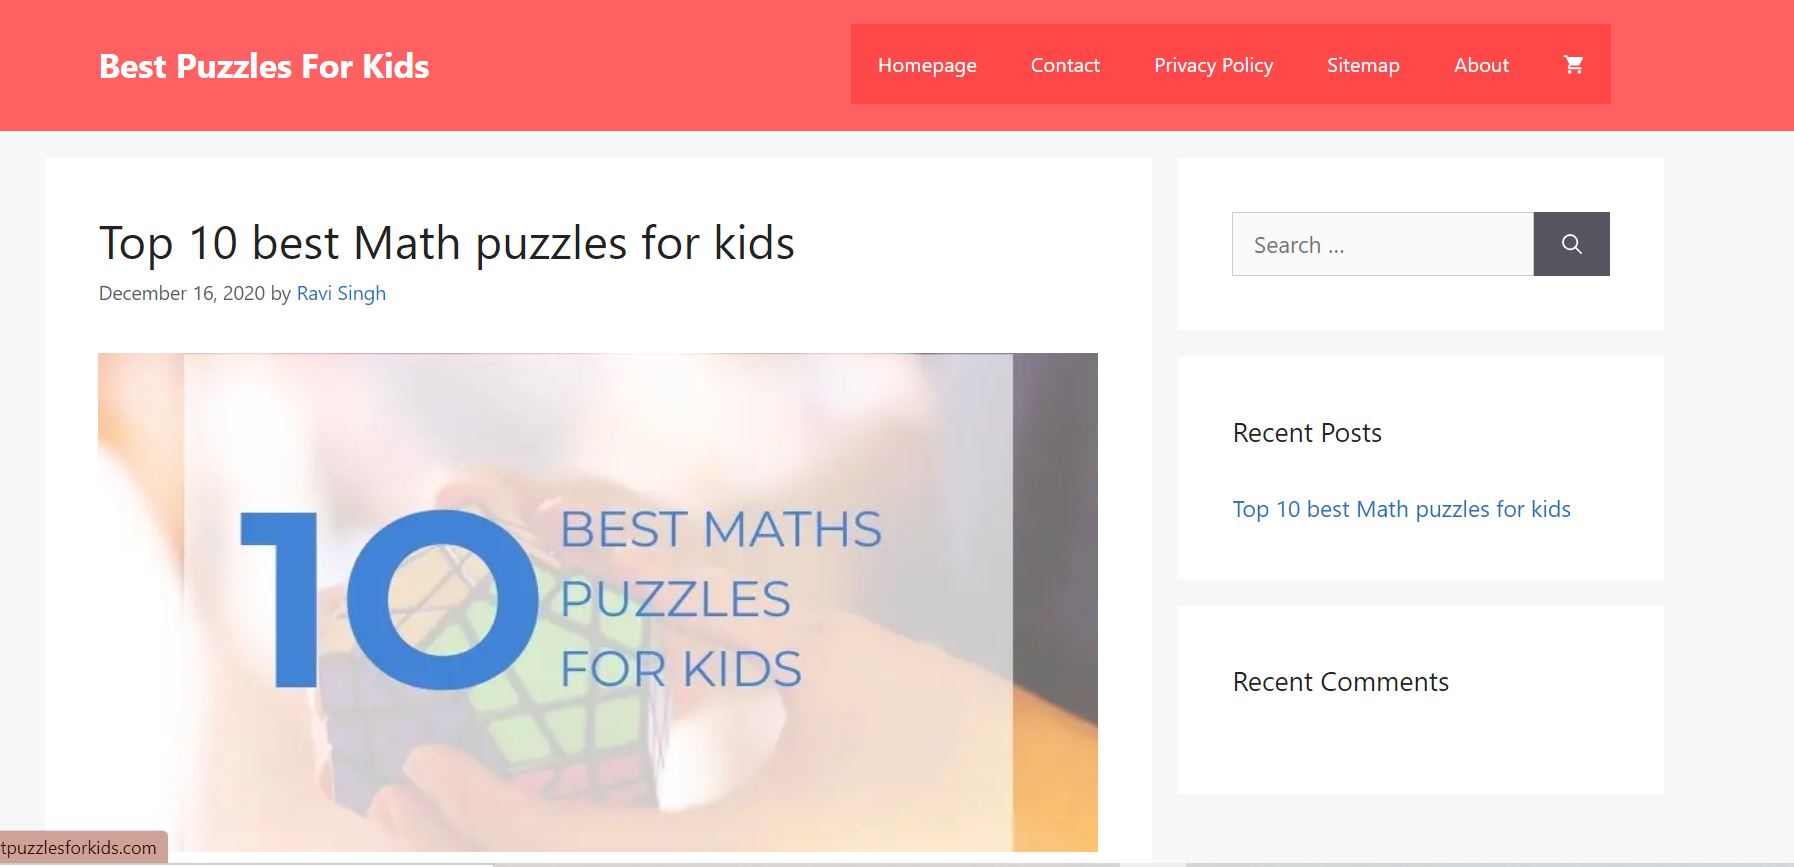 Best Puzzles For Kids